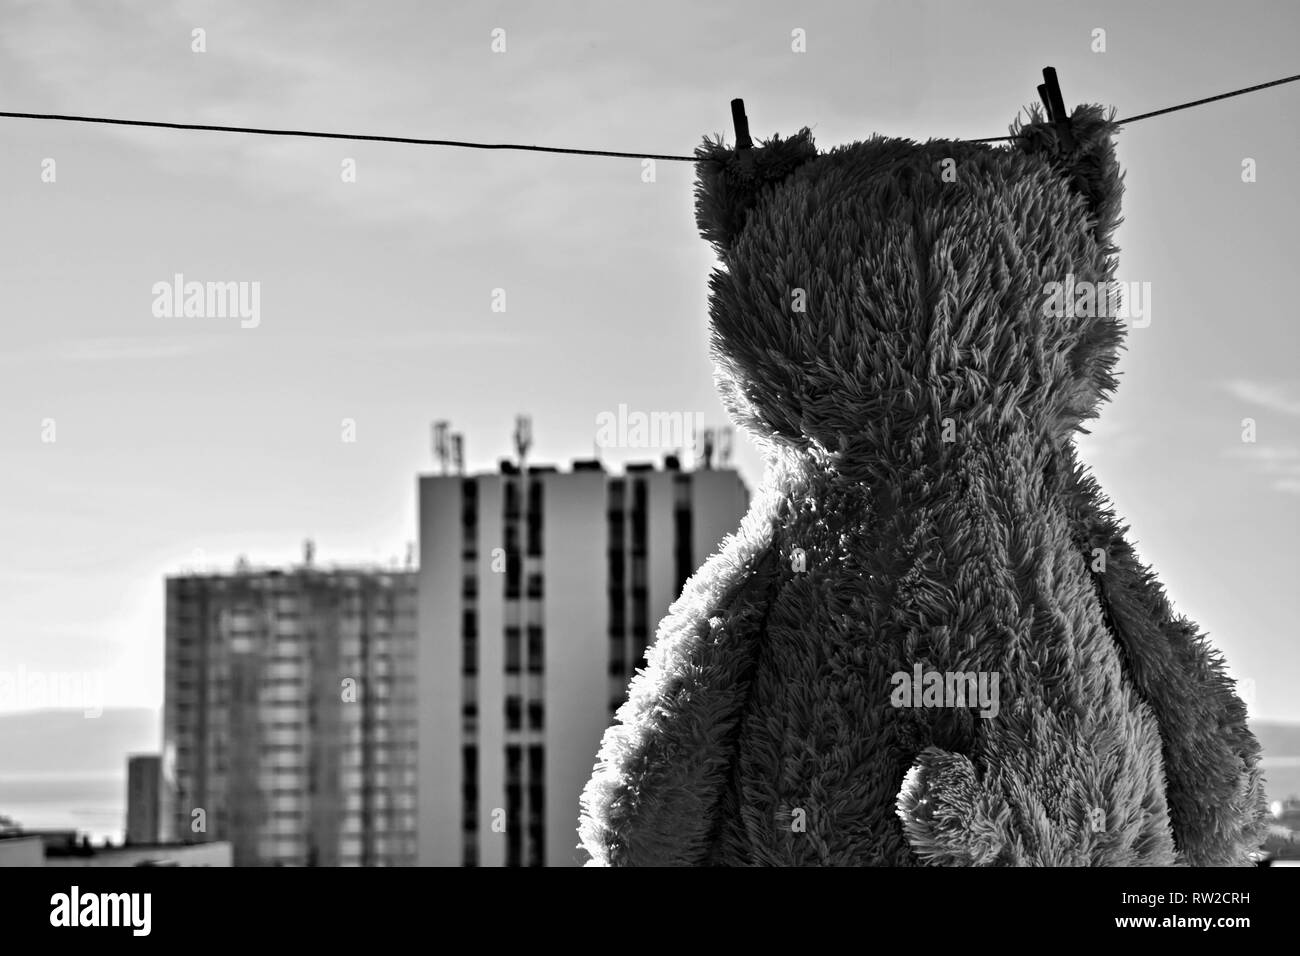 Teddy bear toy  hanging on rope by clothes pin with buildings in background/ City view - Image Stock Photo